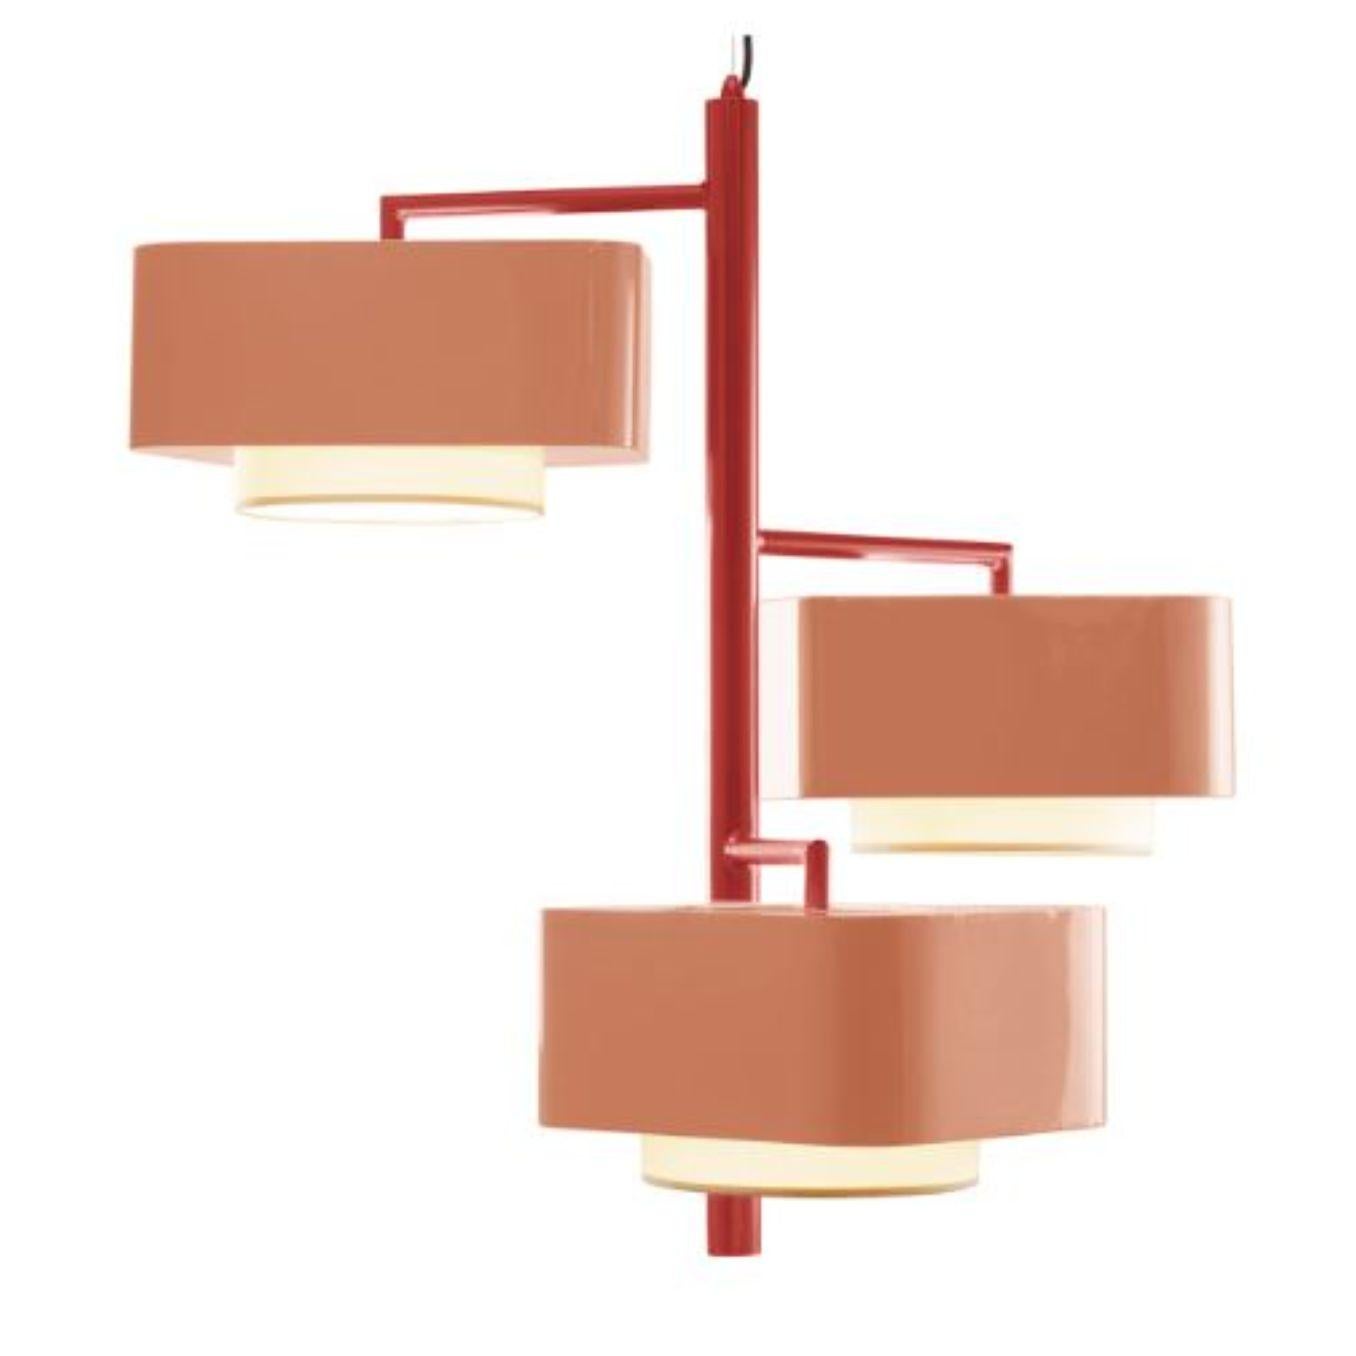 Lipstick and Salmon Carousel I suspension lamp by Dooq
Dimensions: W 97 x D 97 x H 86 cm
Materials: lacquered metal.
abat-jour: cotton
Also available in different colors.

Information:
230V/50Hz
E27/3x20W LED
120V/60Hz
E26/3x15W LED
bulbs not